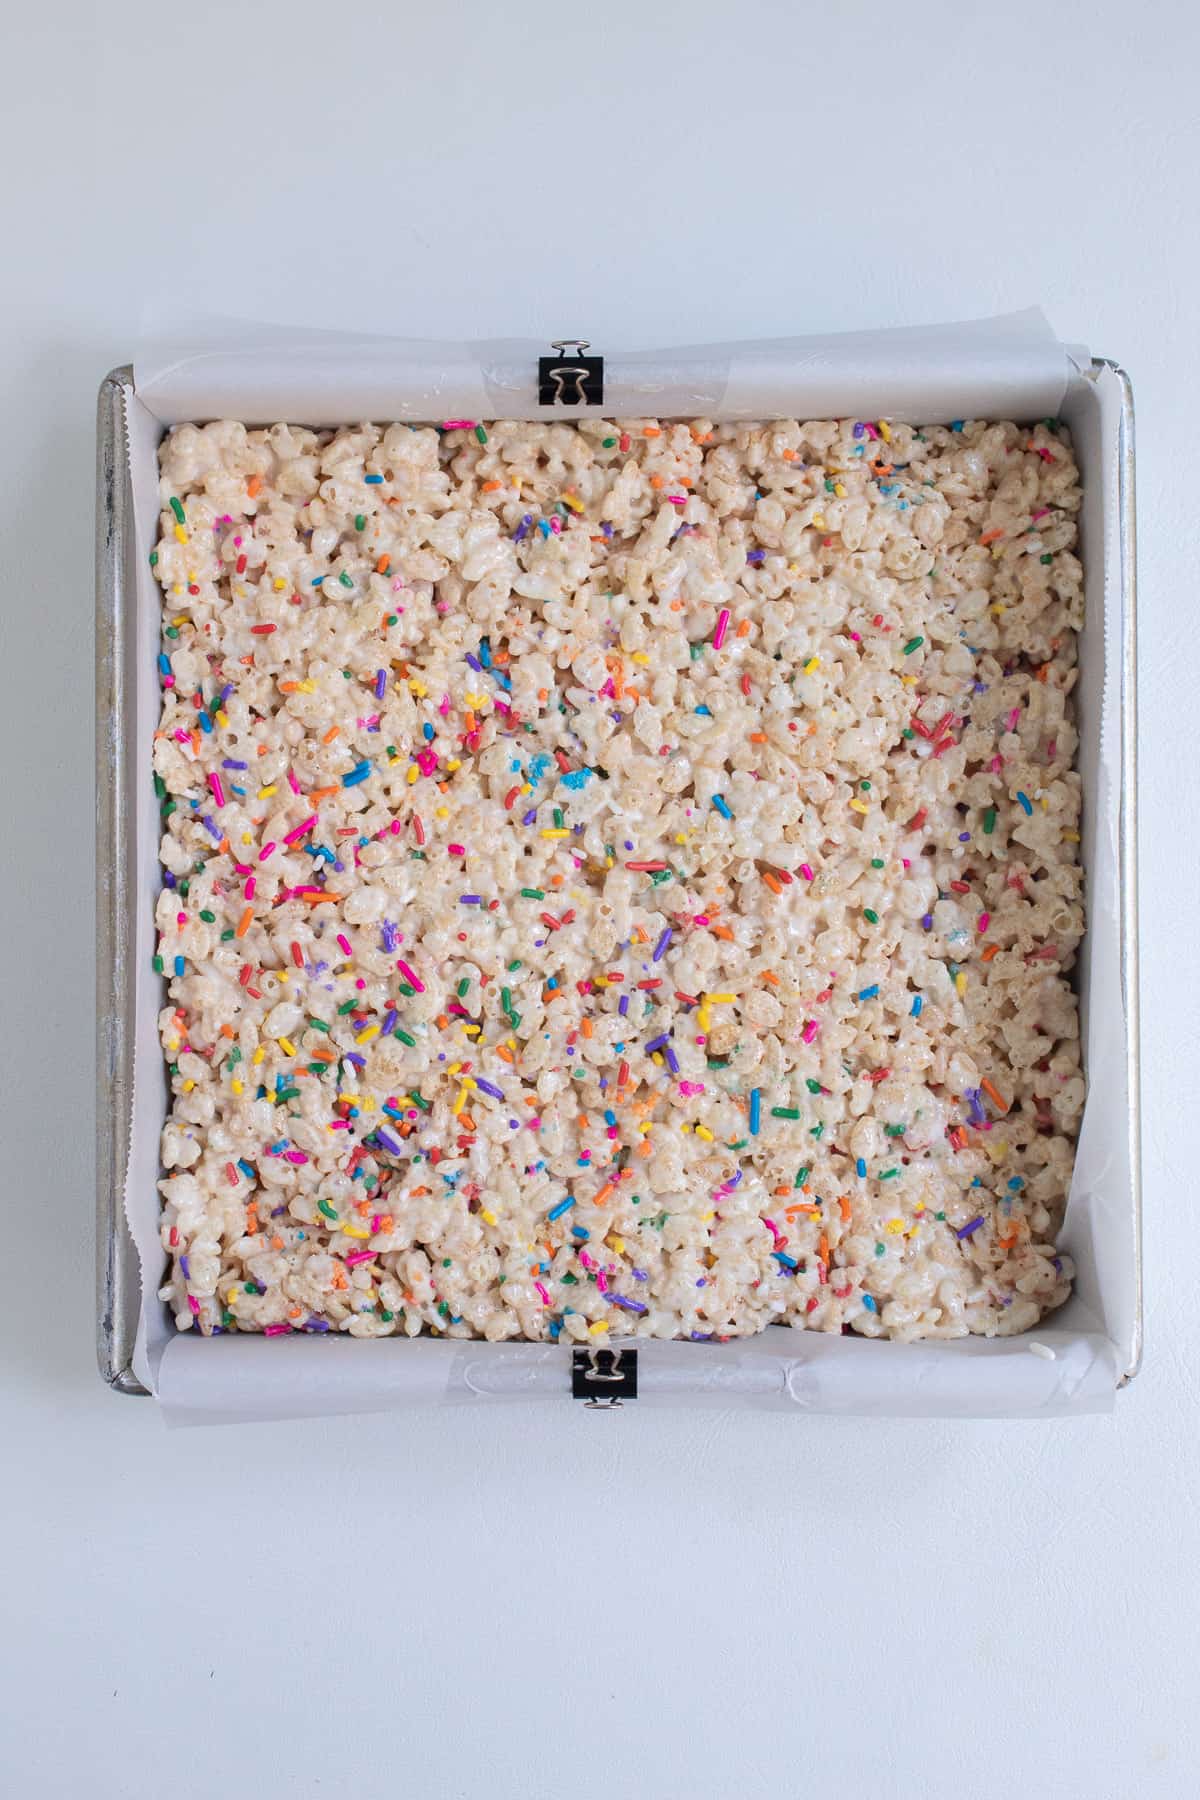 The rice krispie mixture is pressed into a square pan lined with parchment paper.